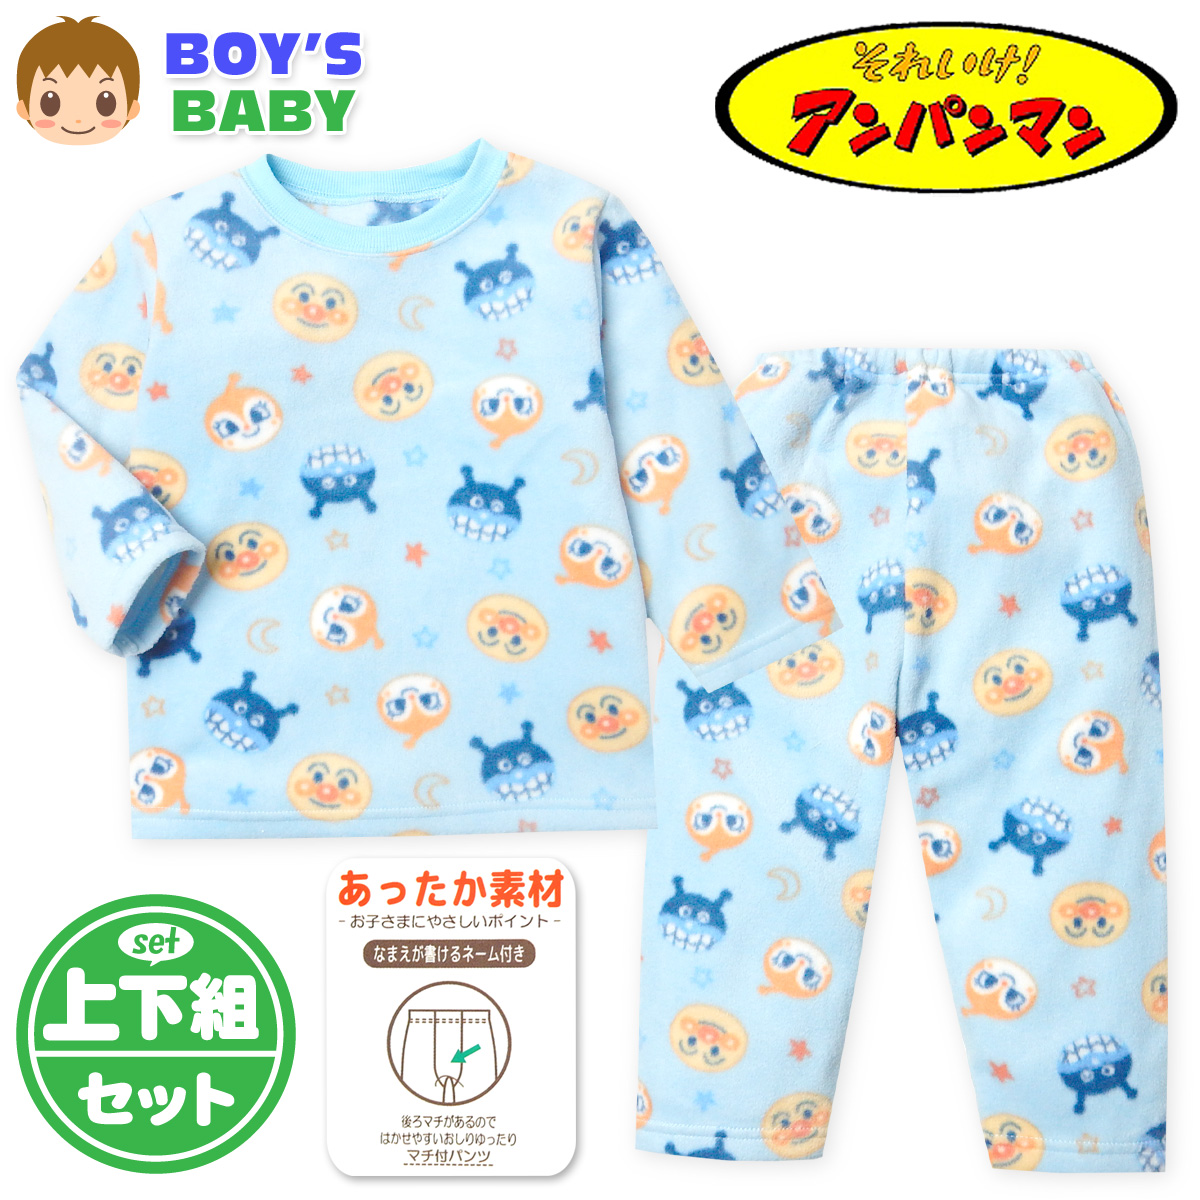  free shipping man . baby fleece long sleeve pyjamas Anpanman warm material top and bottom collection rear inset baby clothes man iw-0720c-bl mail service correspondence 